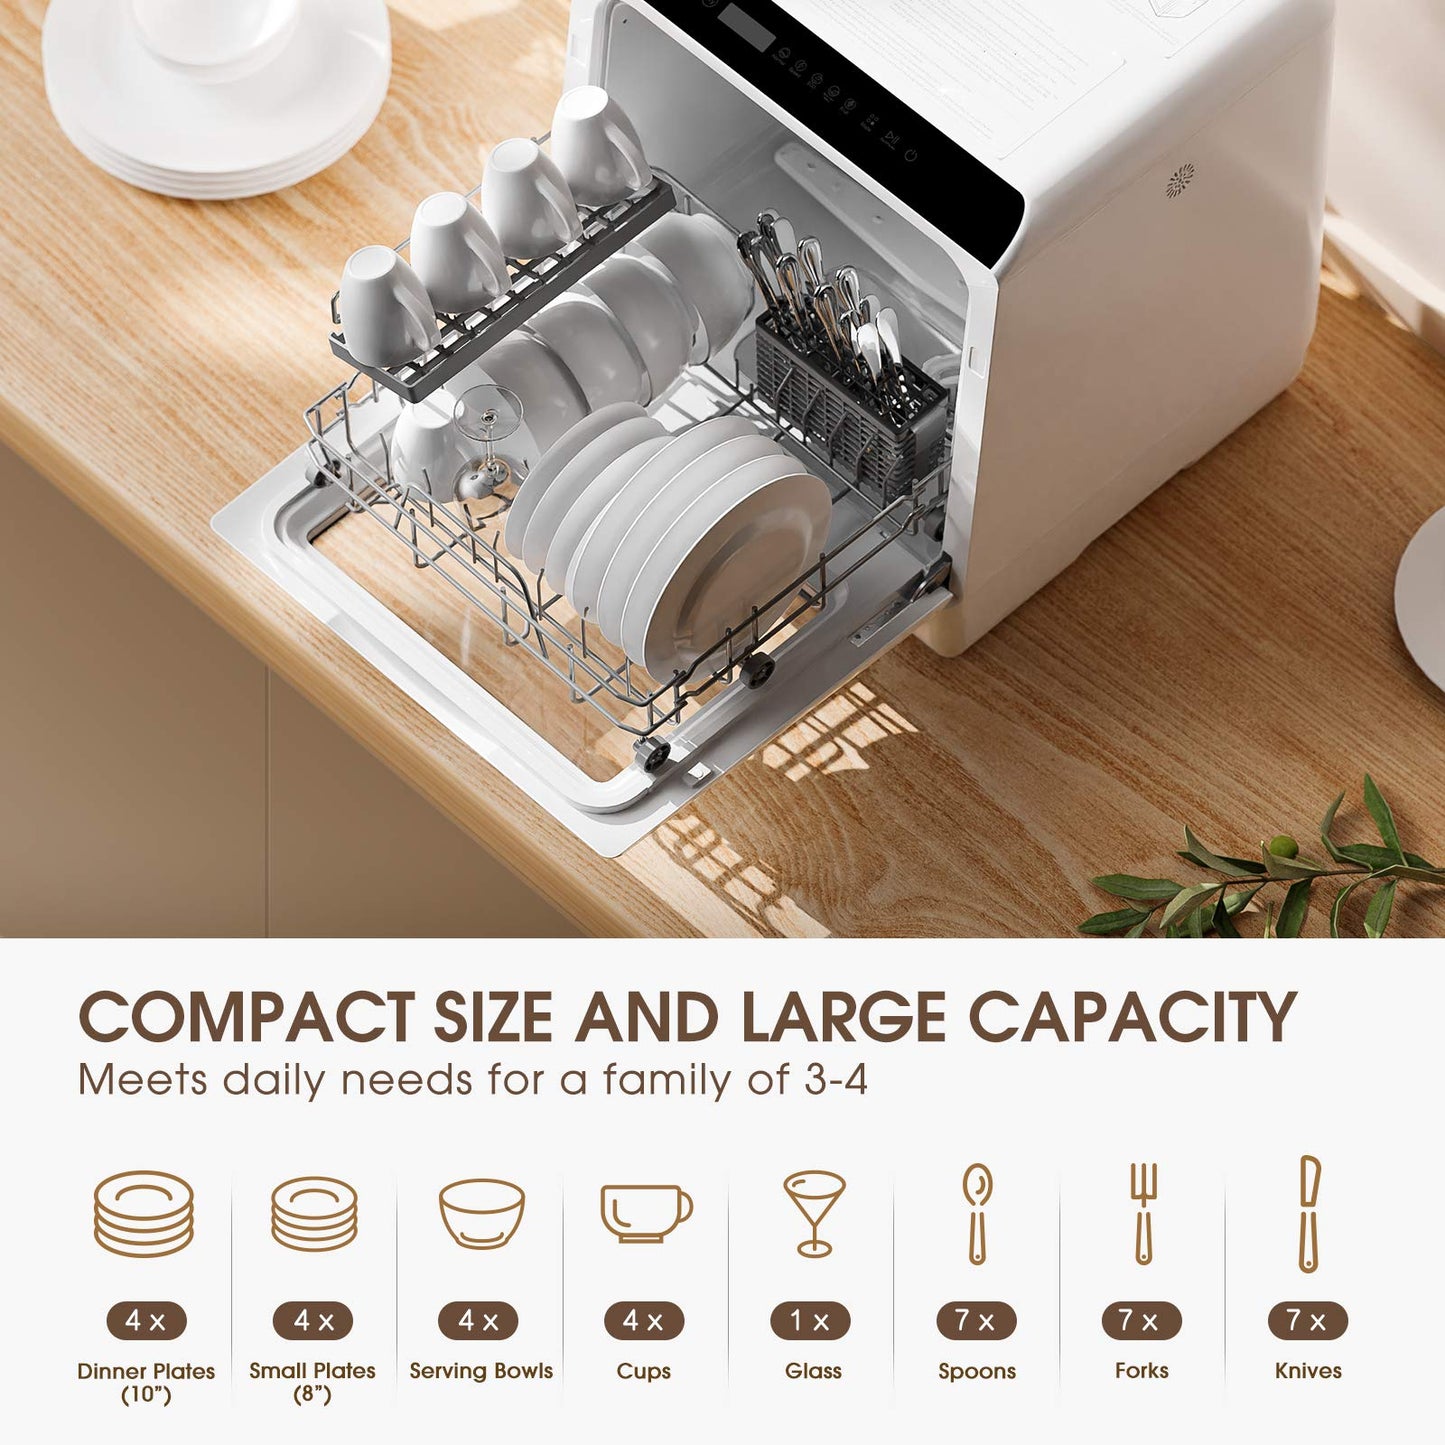 NOVETE Portable Countertop Dishwashers, Compact Dishwashers with 5 L Built-in Water Tank & Inlet Hose, 5 Washing Programs, Baby Care, Air-Dry Function and LED Light for Small Apartments